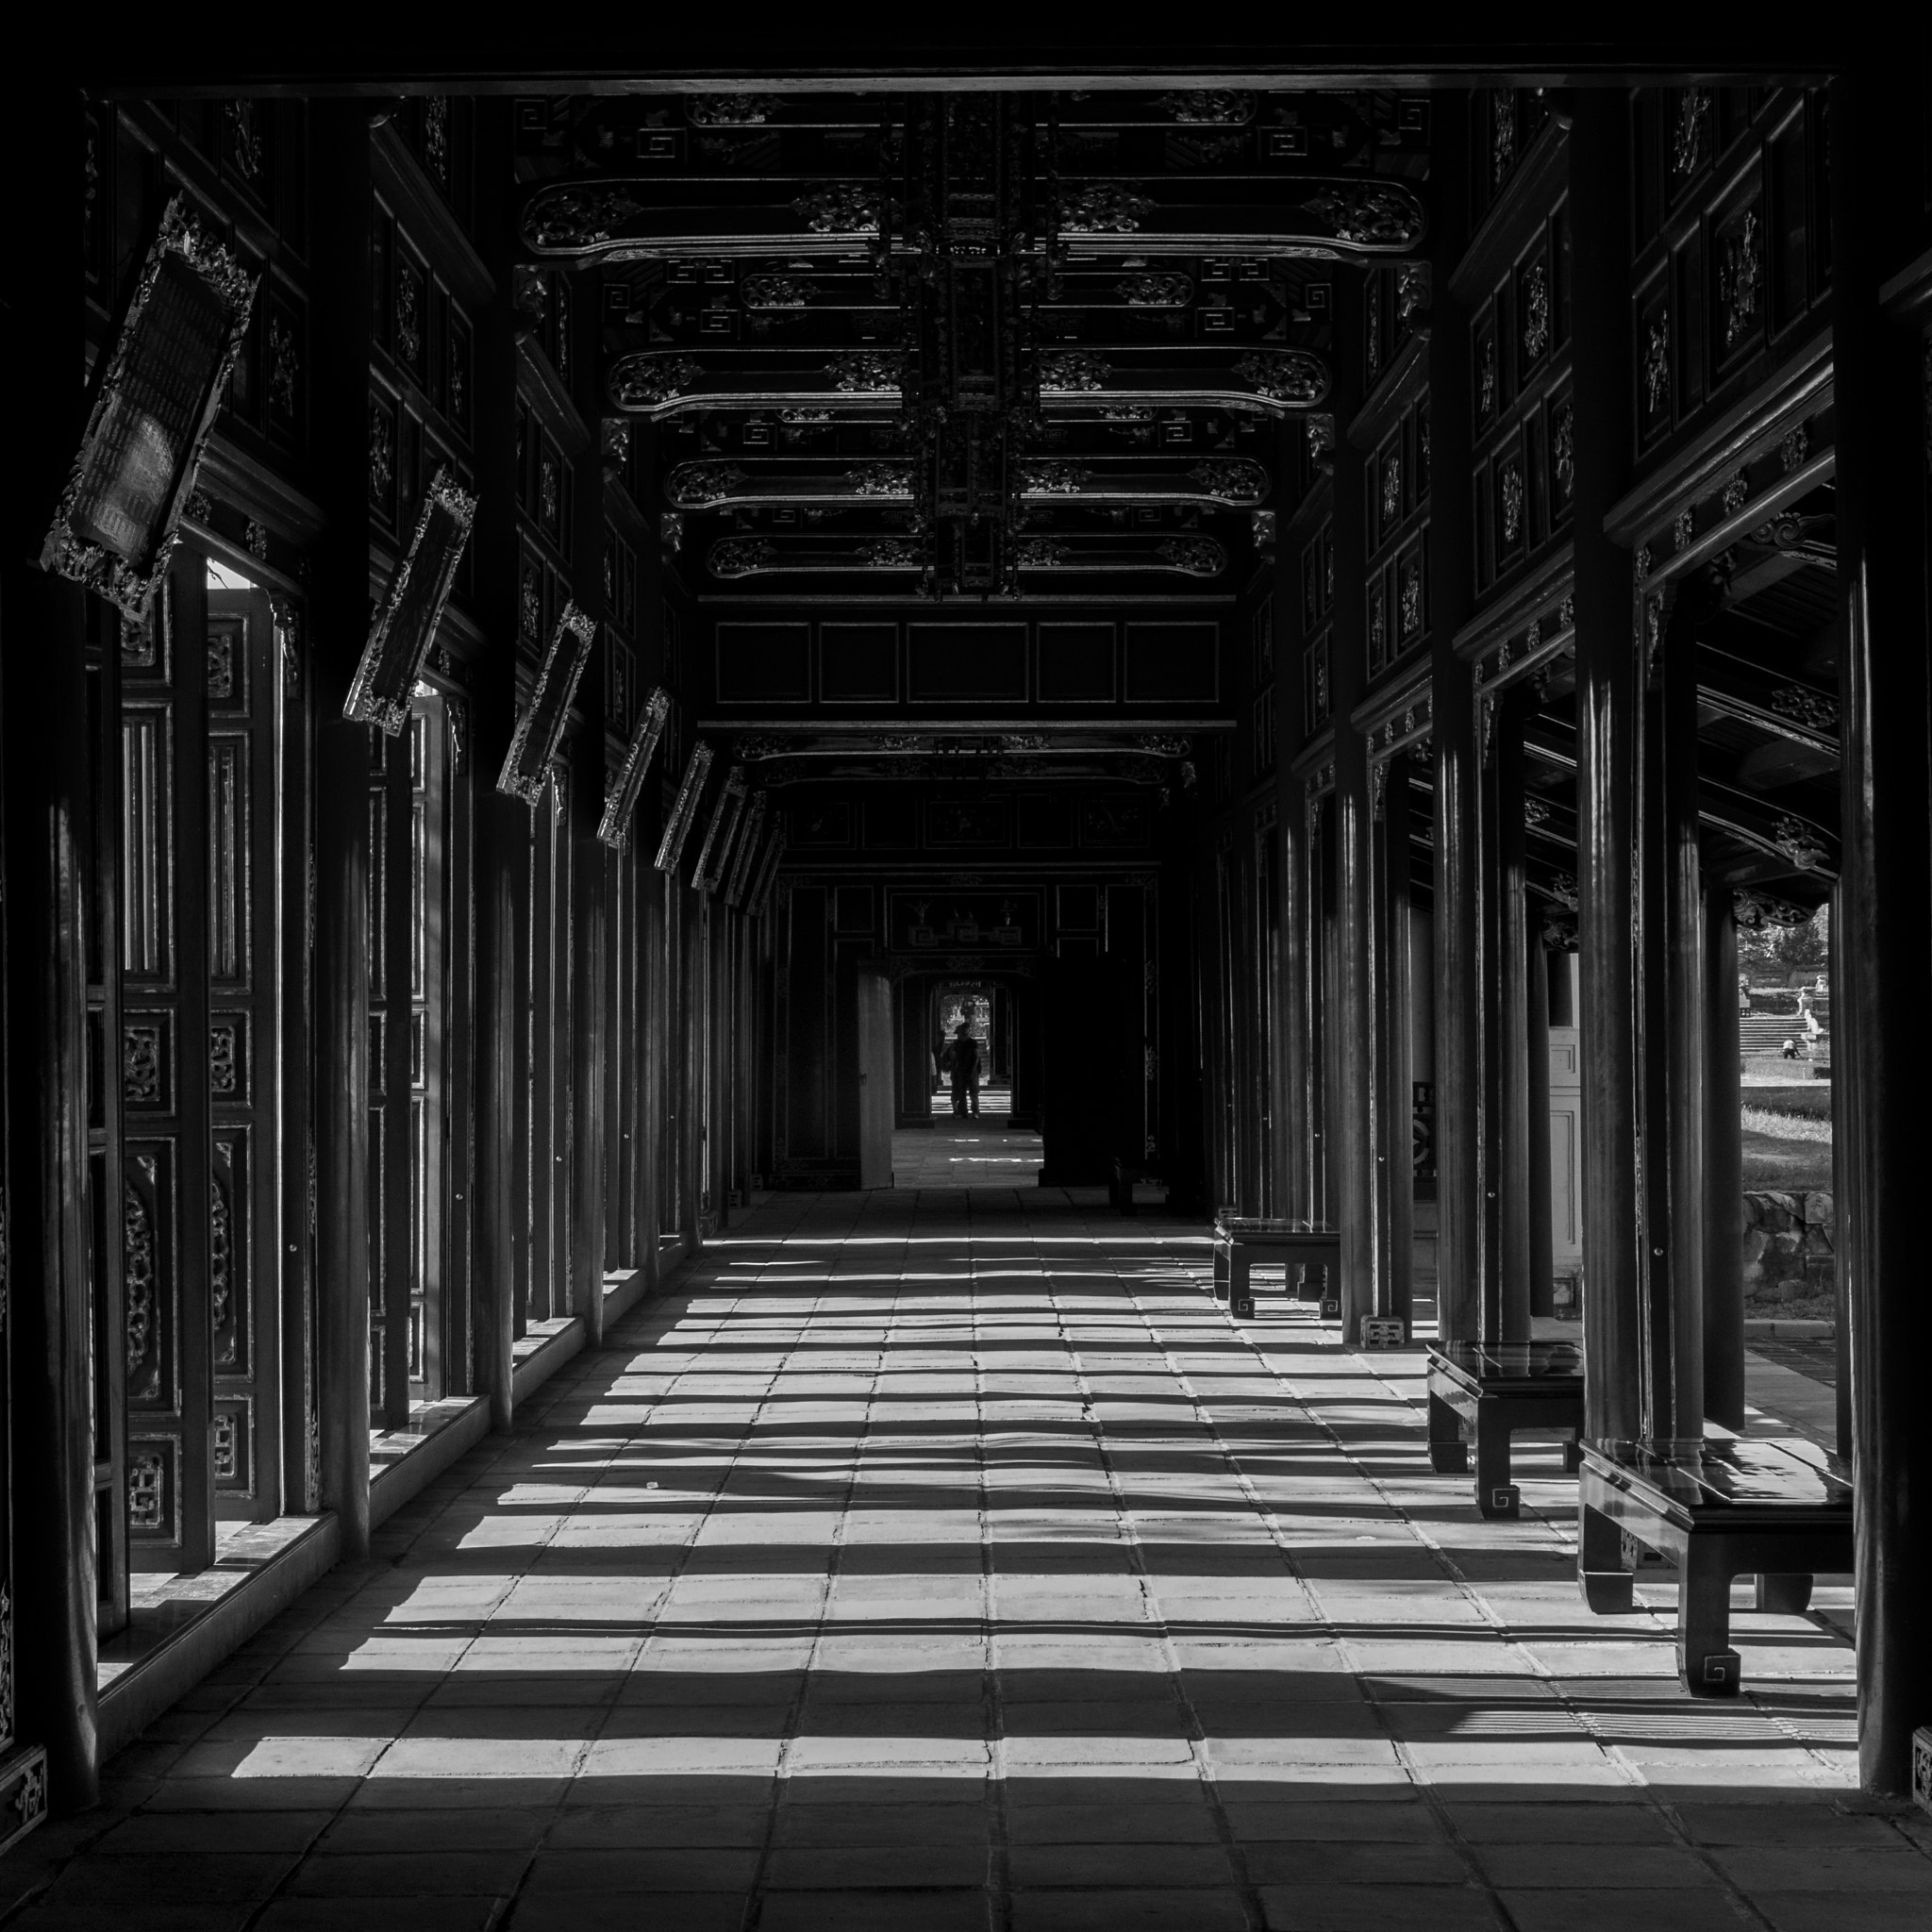 Canon EOS 70D + Sigma 24-105mm f/4 DG OS HSM | A sample photo. Pathway in the imperial city,hue, vietnam photography